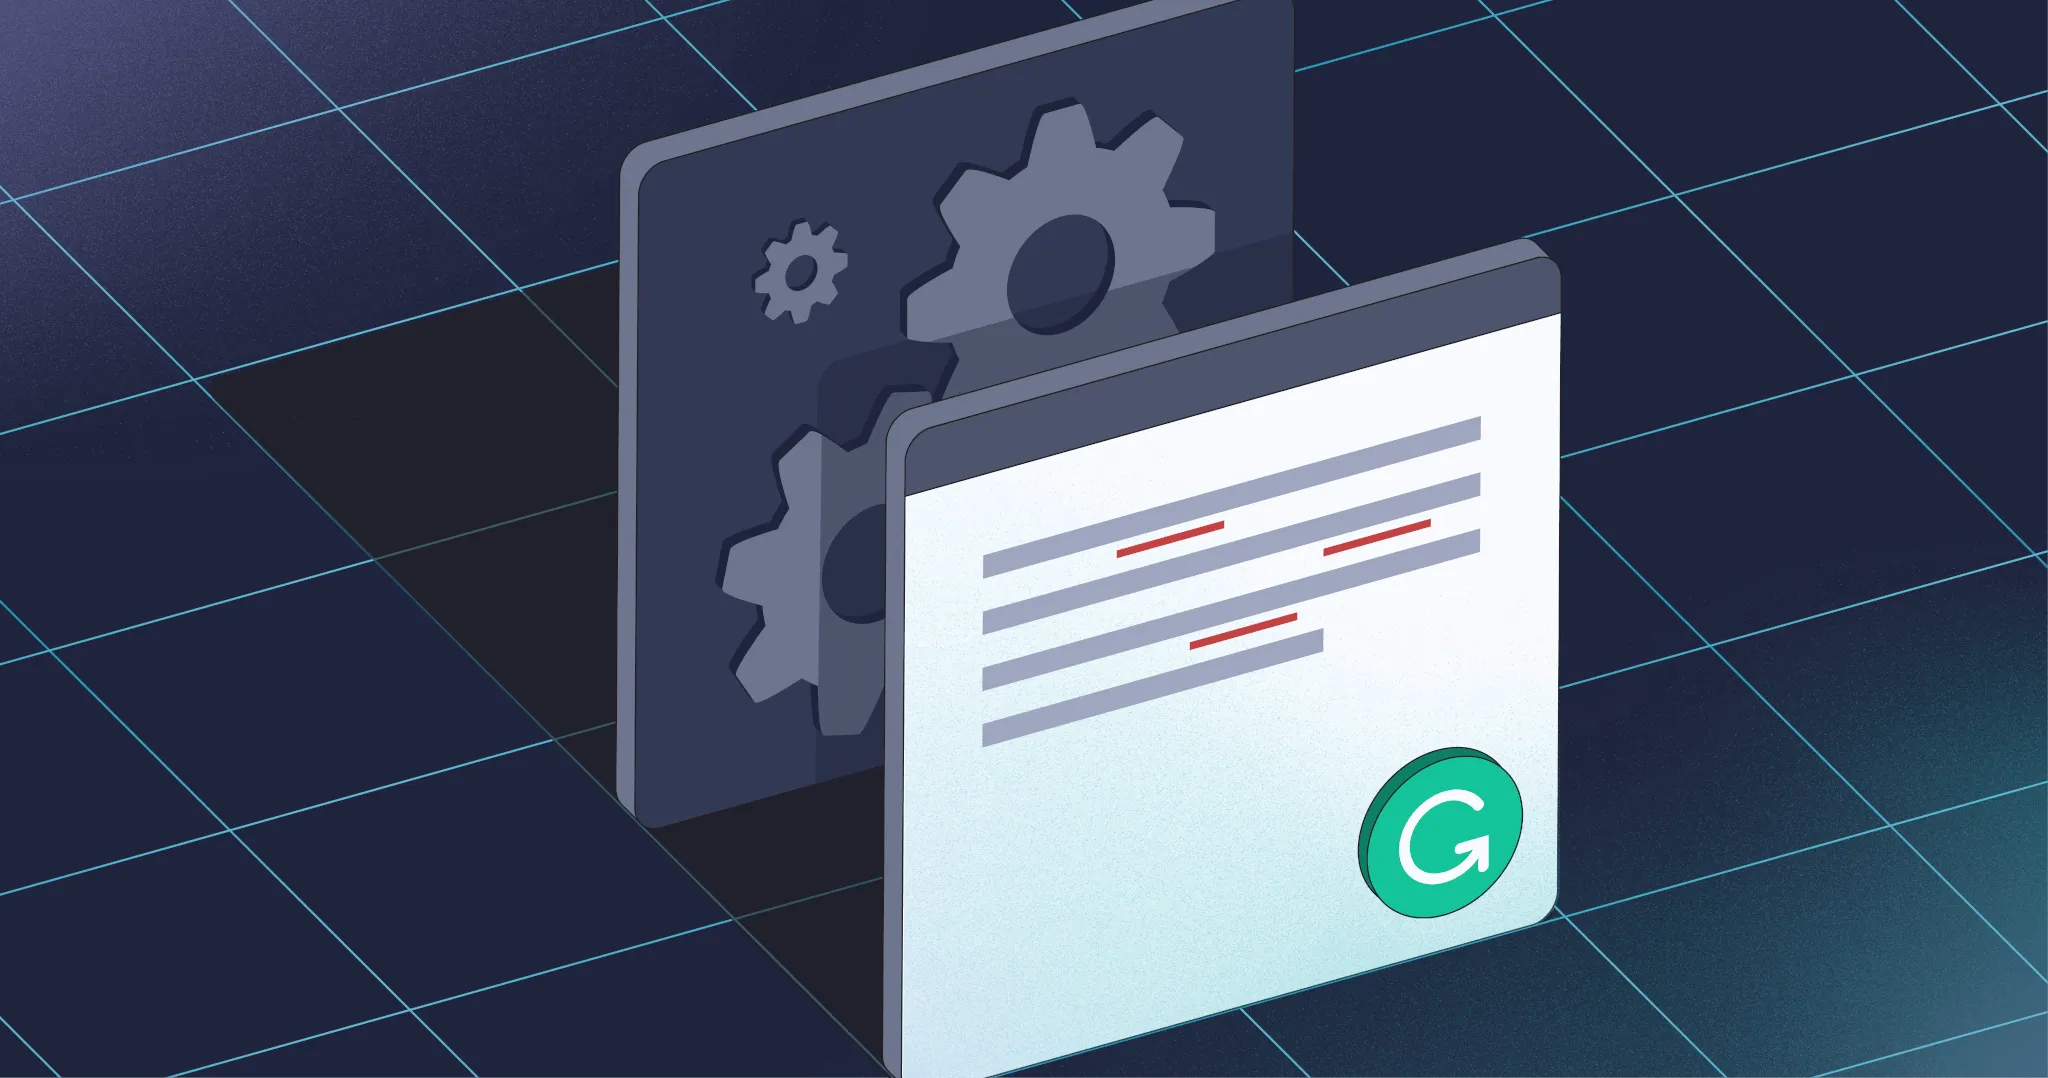 graphic showing cogs peeking out from behind a page with text and the Grammarly logo